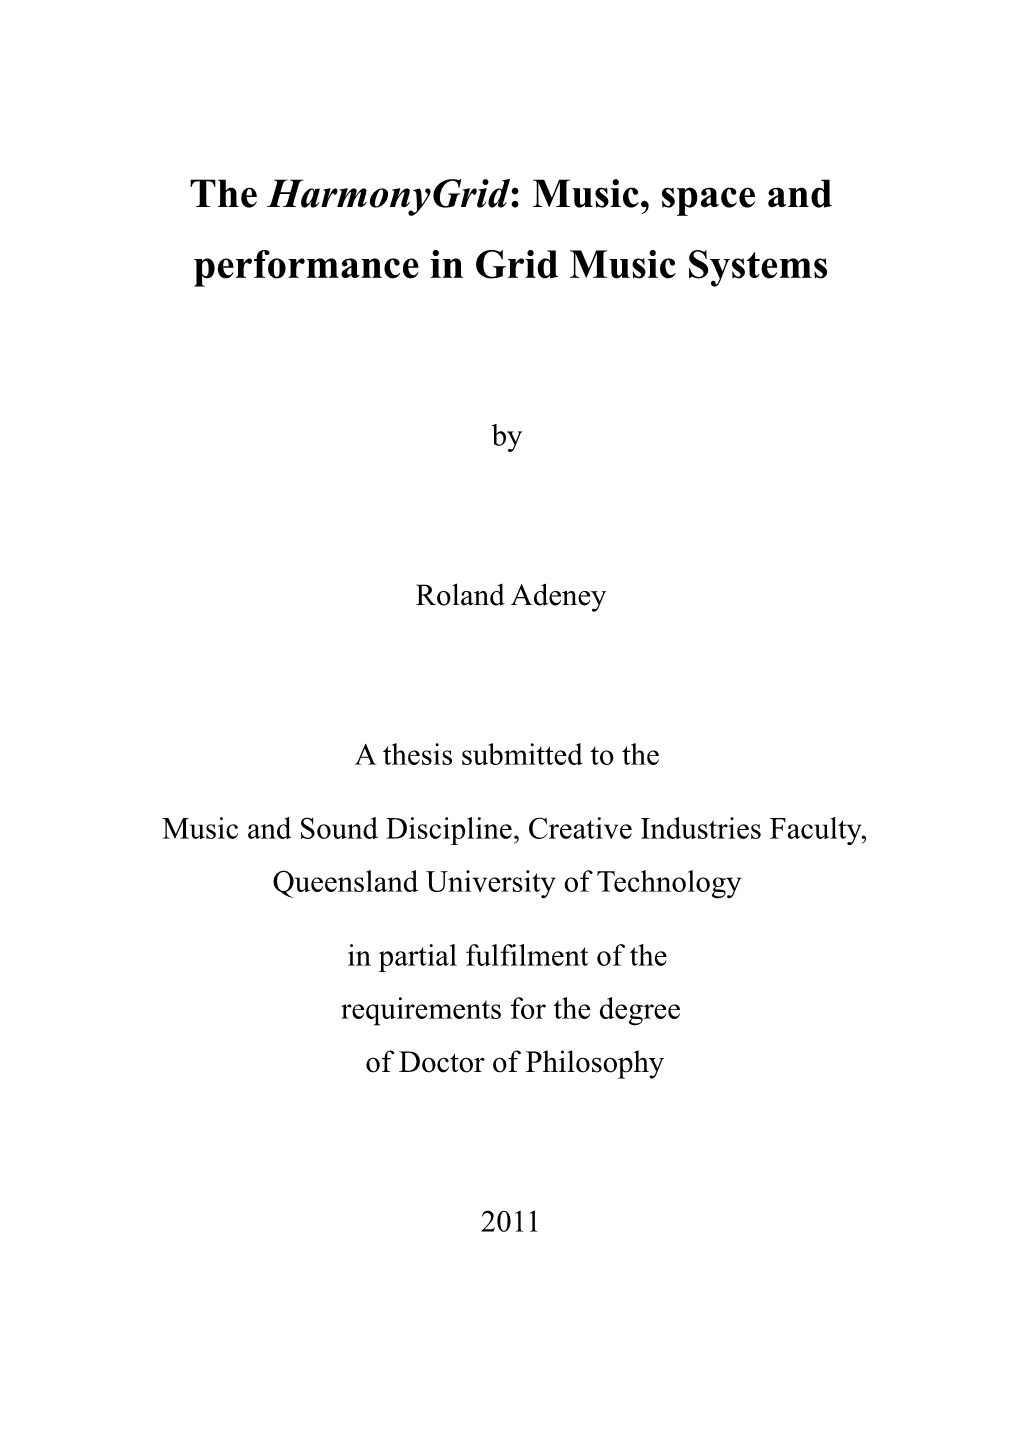 Music, Space and Performance in Grid Music Systems